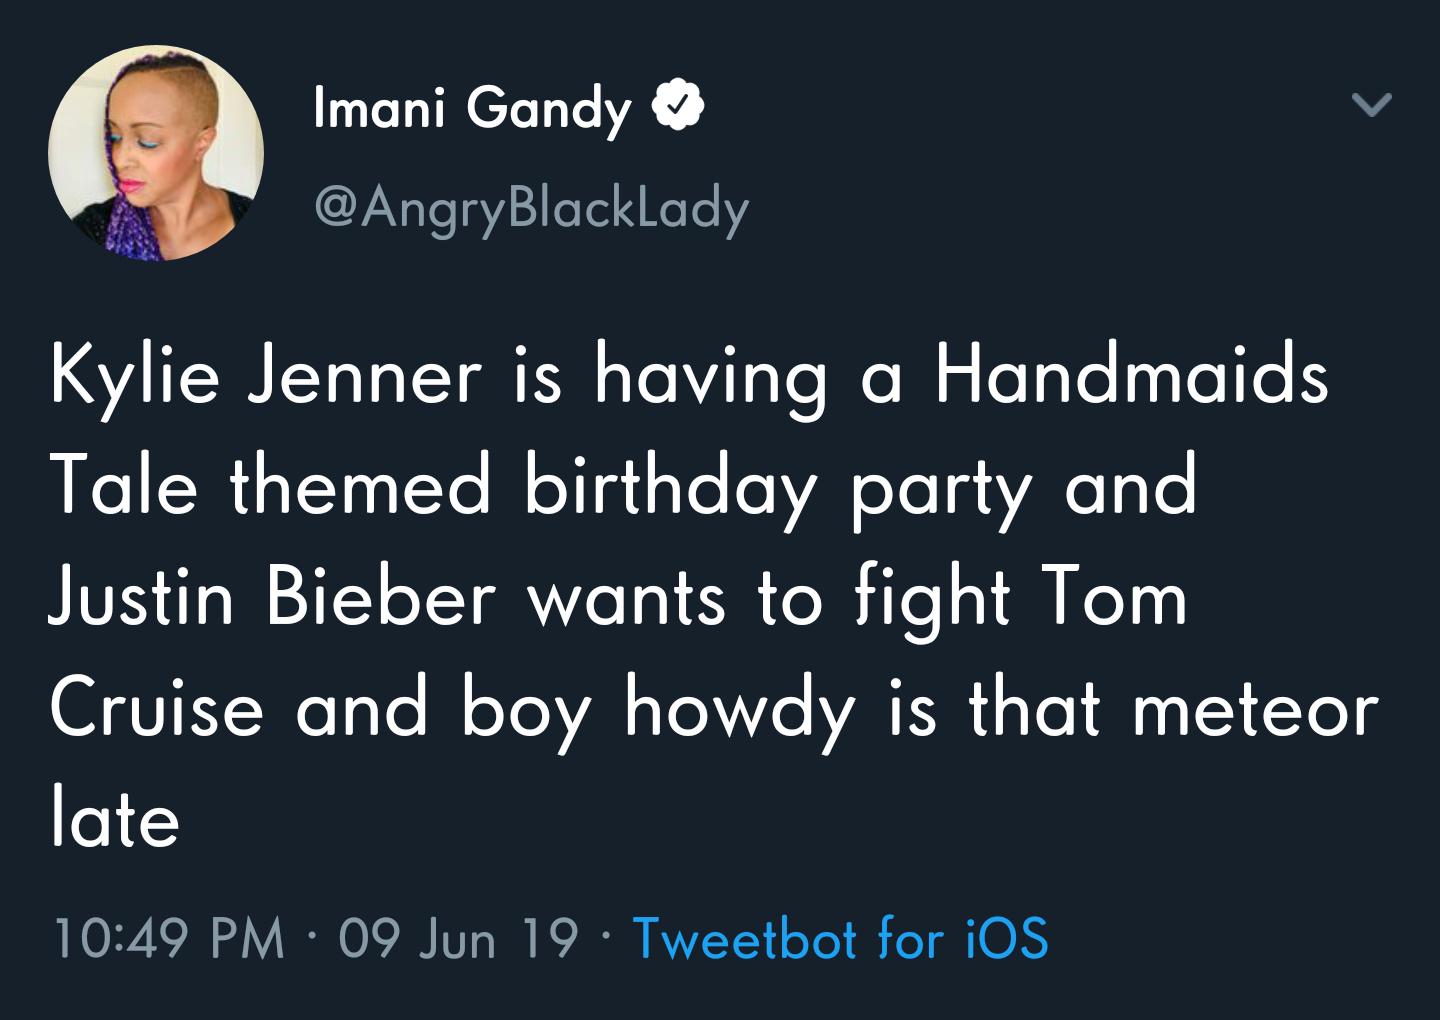 presentation - Imani Gandy Kylie Jenner is having a Handmaids Tale themed birthday party and Justin Bieber wants to fight Tom Cruise and boy howdy is that meteor late 09 Jun 19 Tweetbot for iOS